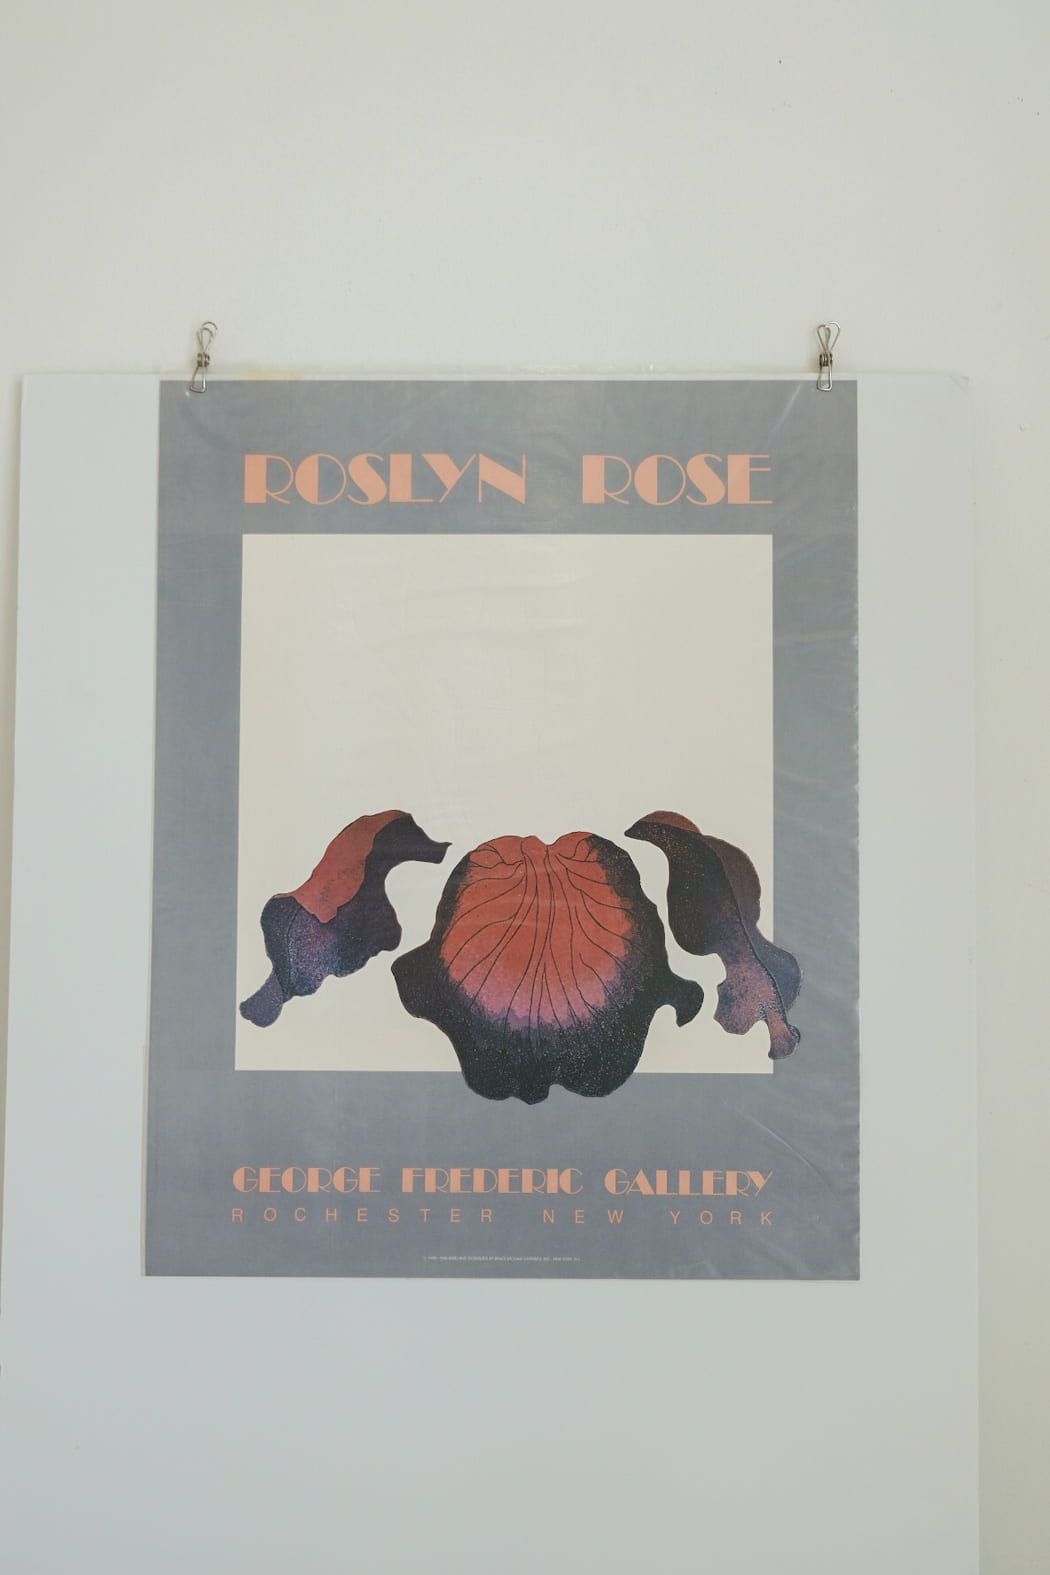 Roslyn Rose from George Frederic Gallery